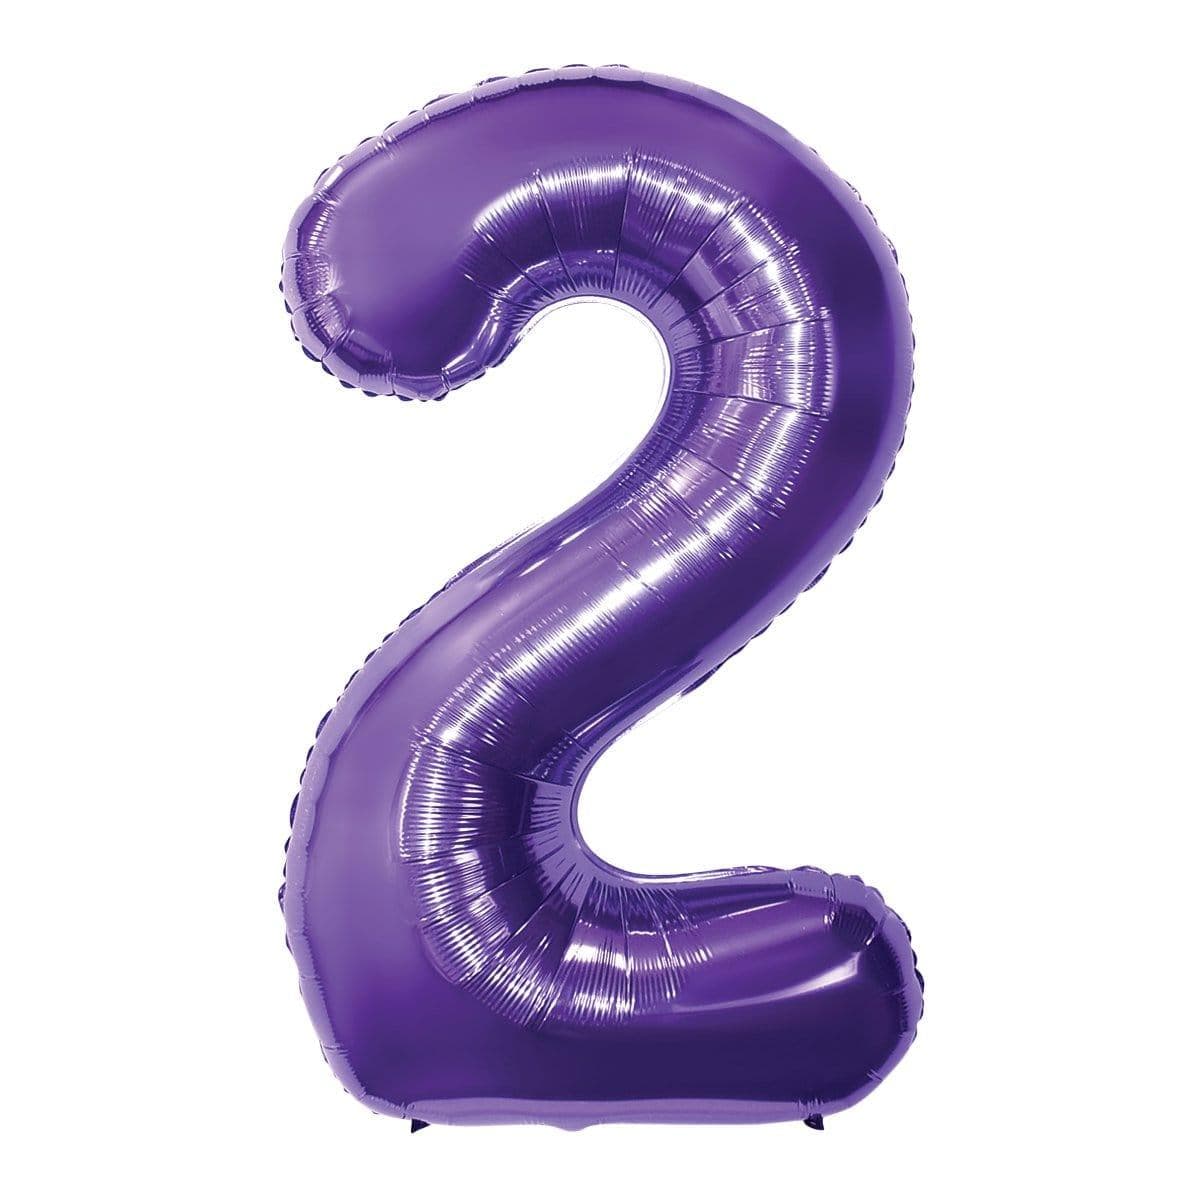 Buy Balloons Purple Number 2 Foil Balloon, 34 Inches sold at Party Expert